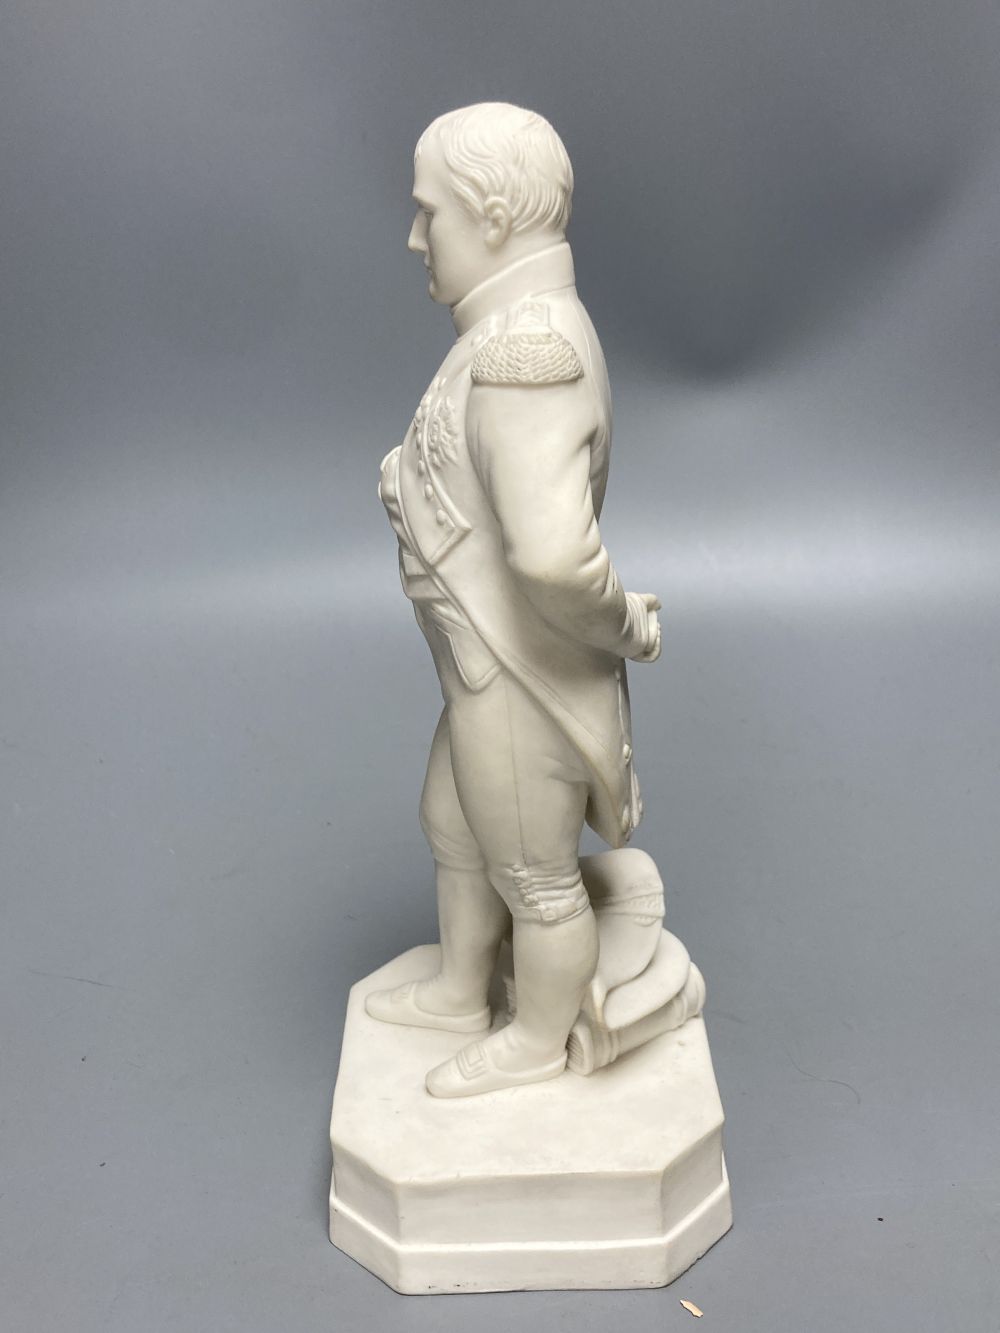 A Robinson & Leadbeater parian figure of Napoleon, standing on shaped square base, 25cm